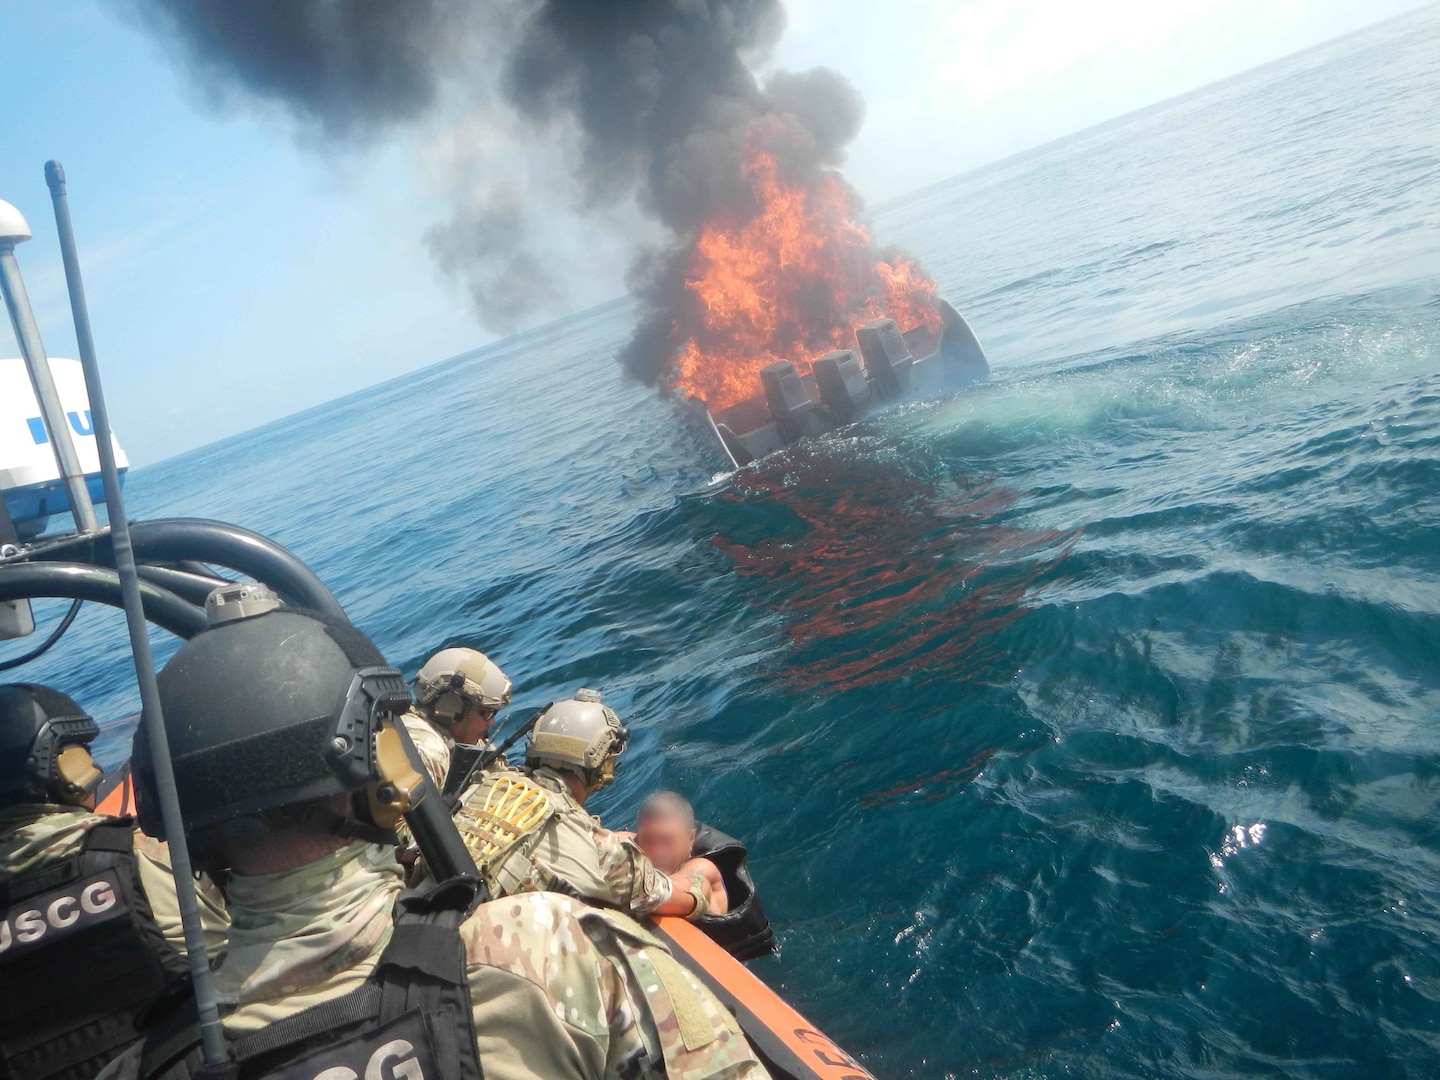 suspected smuggler who jumped from his burning vessel, in background, is pulled aboard an interceptor boat.